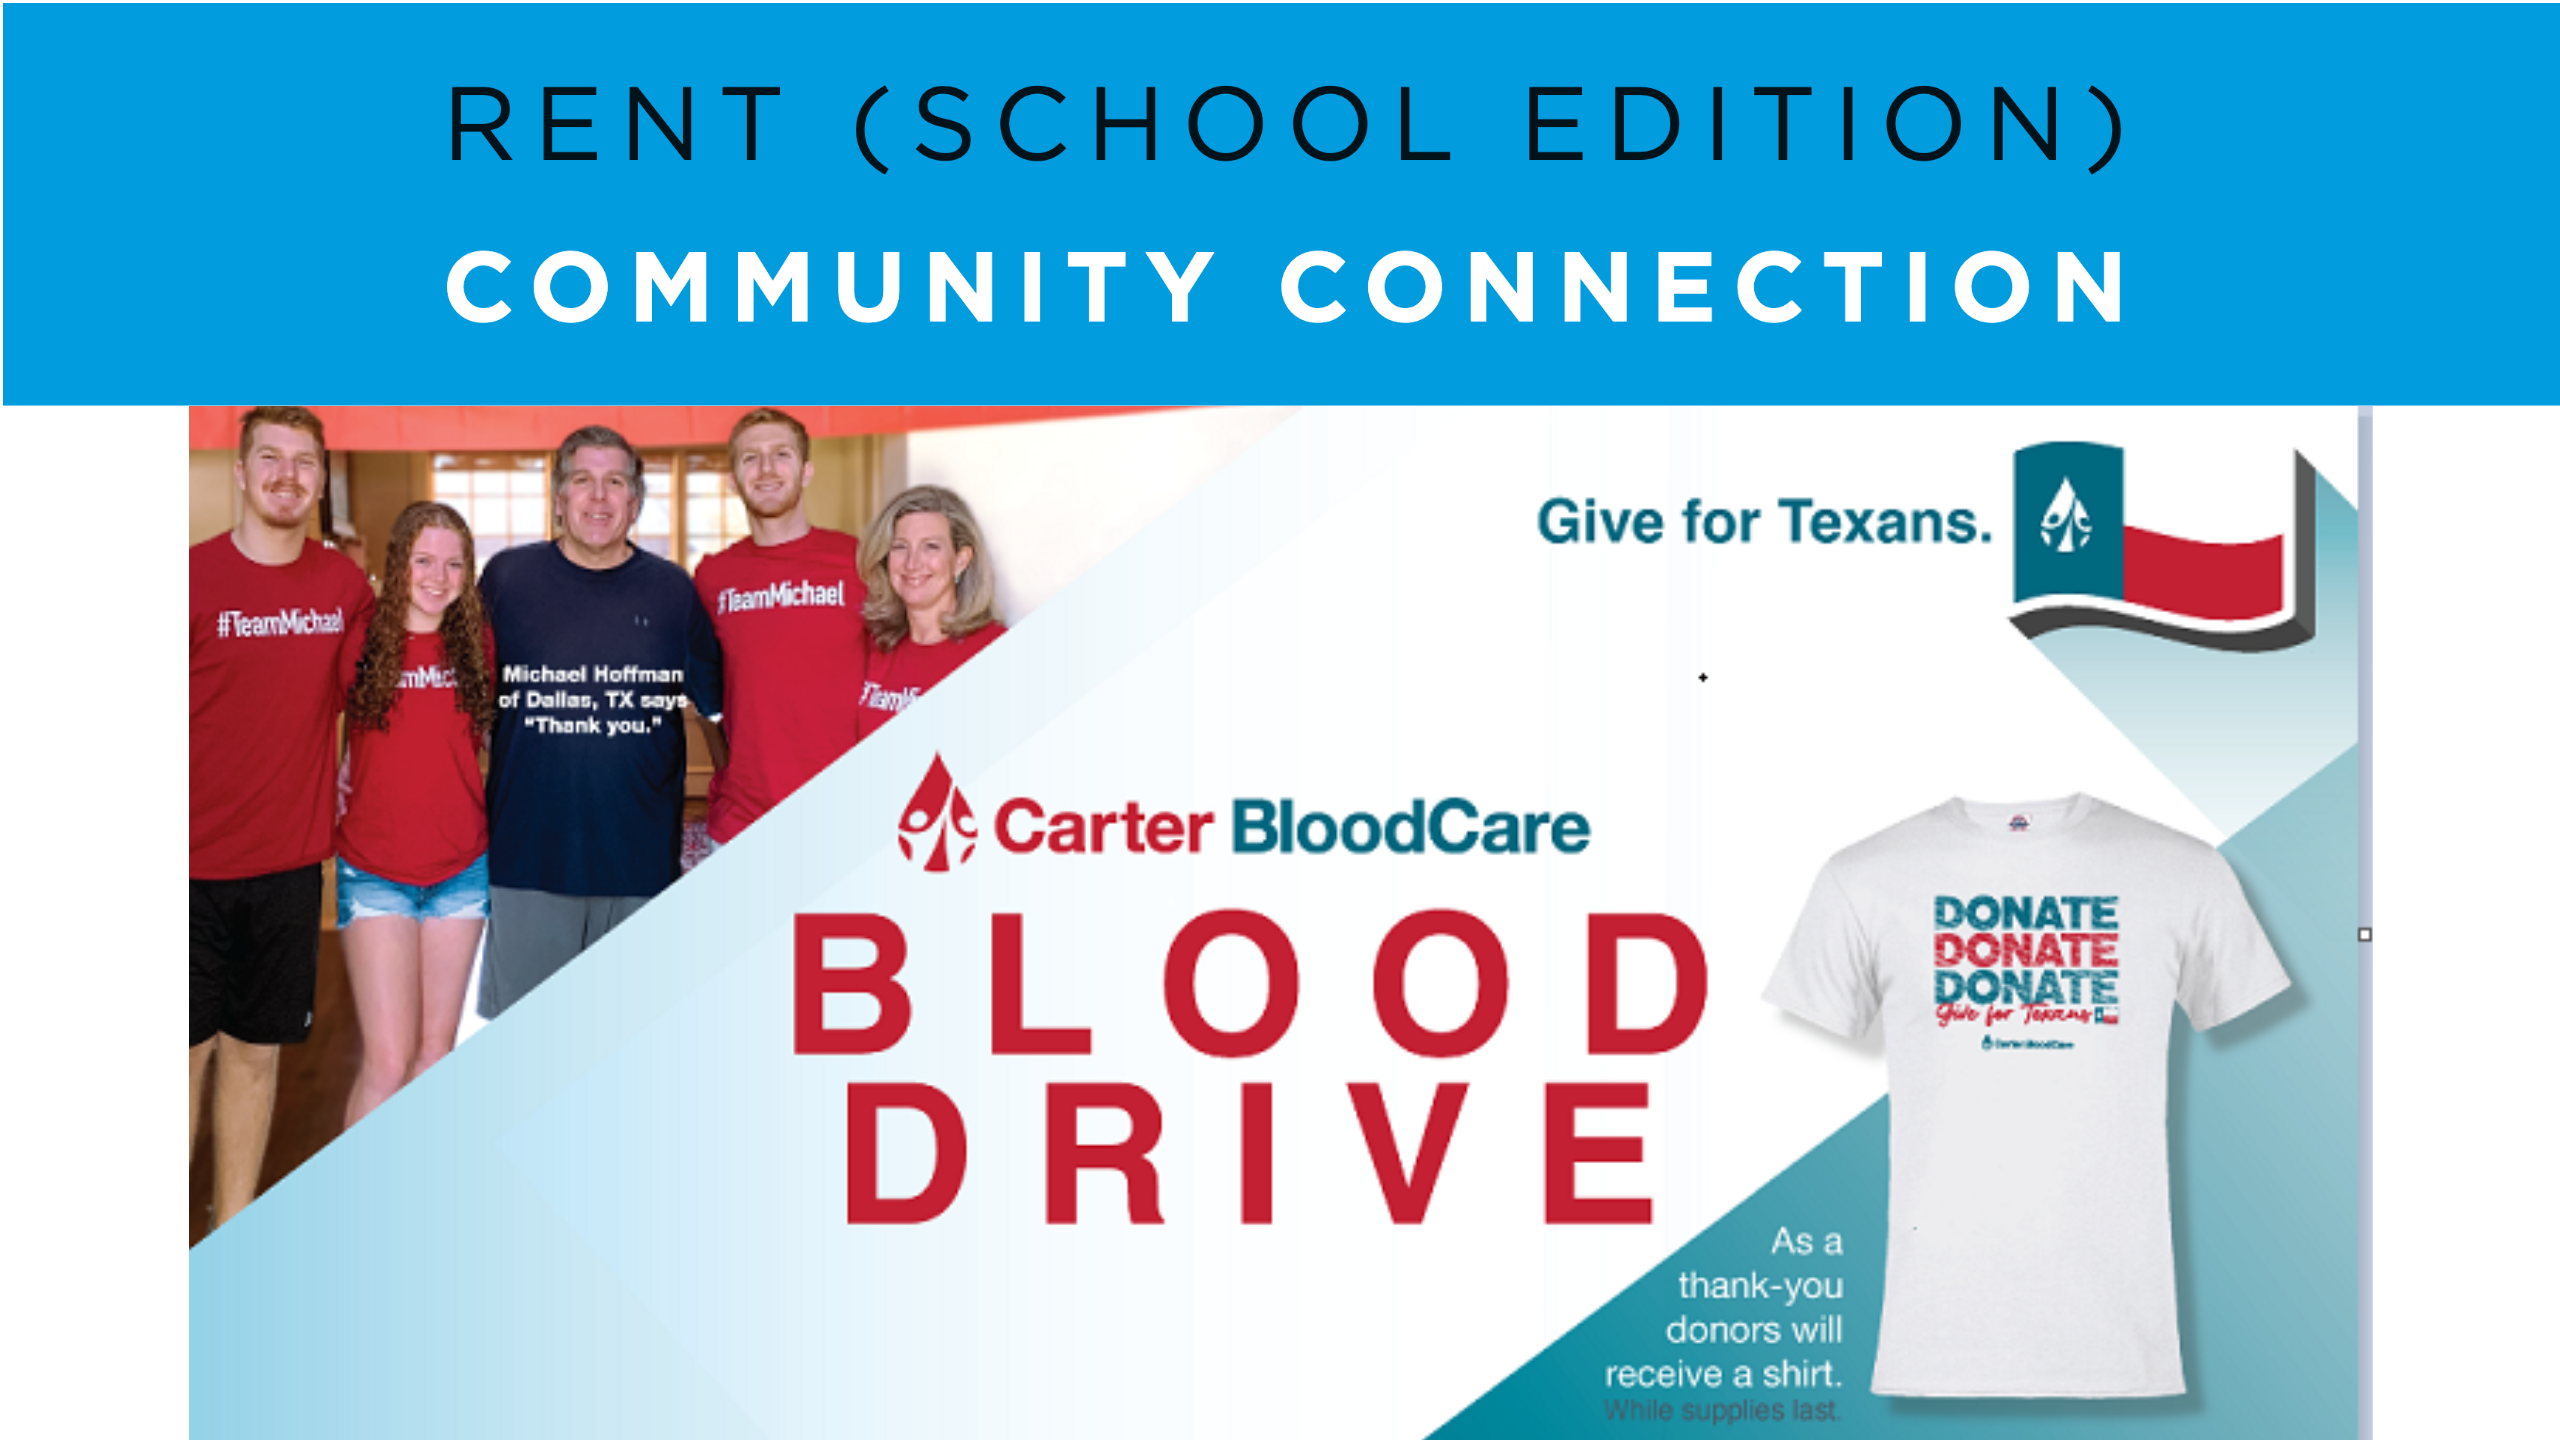 Rent School Edition Community Connection - Carter BloodCare Blood Drive